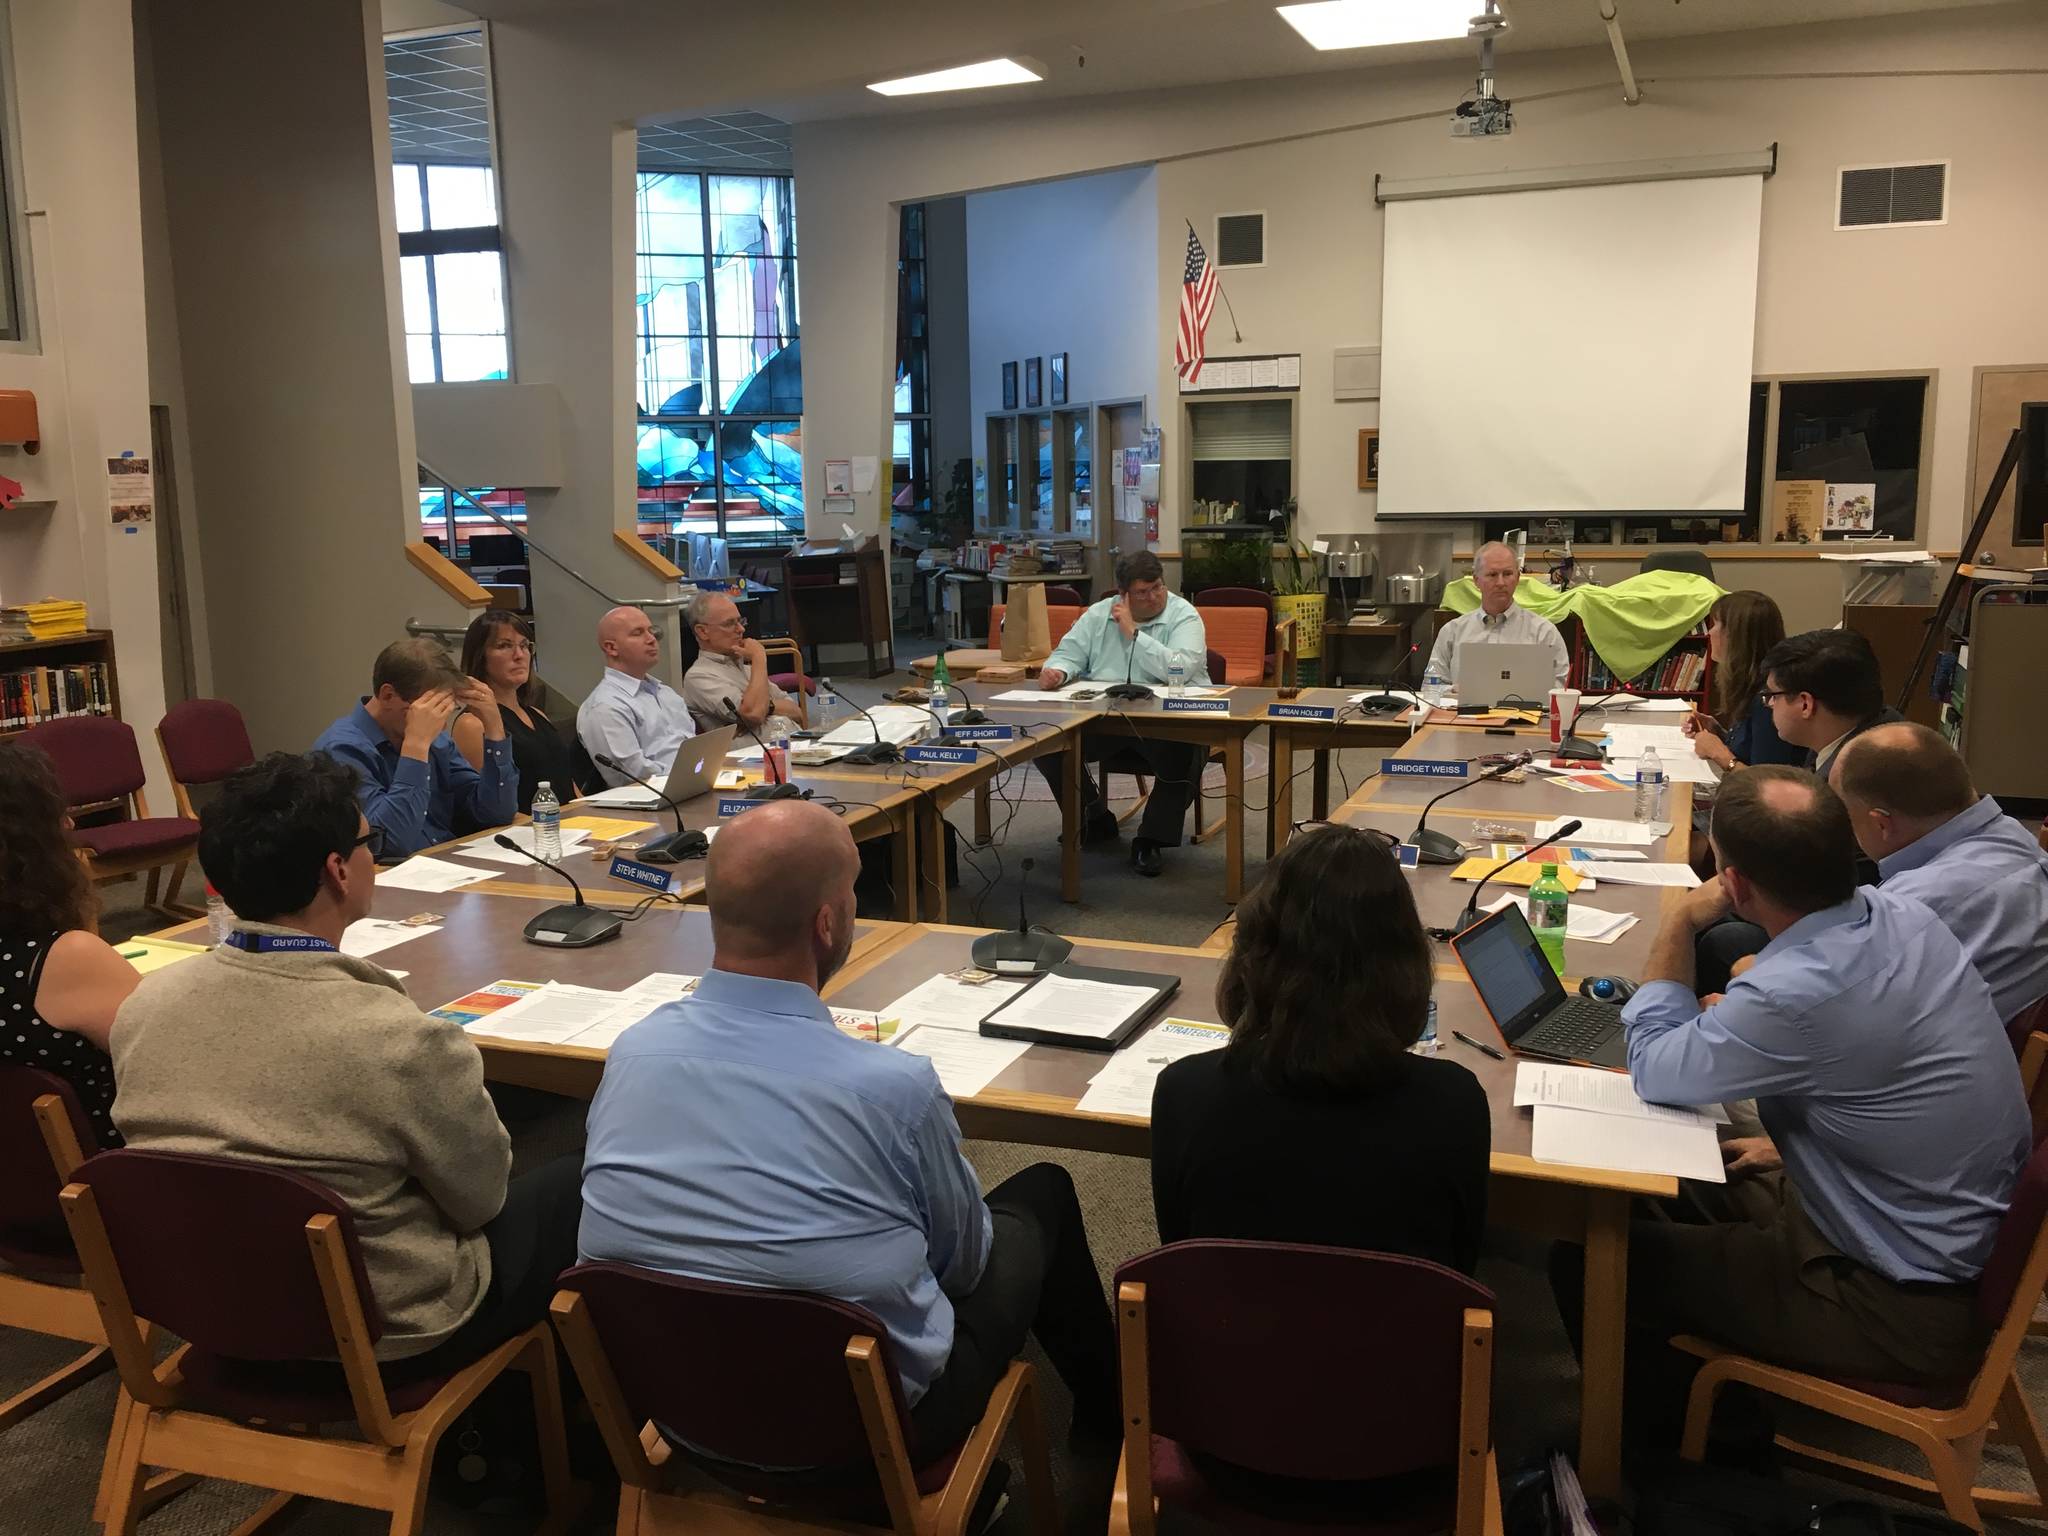 Dr. Bridget Weiss, superintendent of the Juneau School District, speaks to members of the Juneau Board of Education during a meeting Tuesday, August 13. (Juneau Empire | Michael S. Lockett)